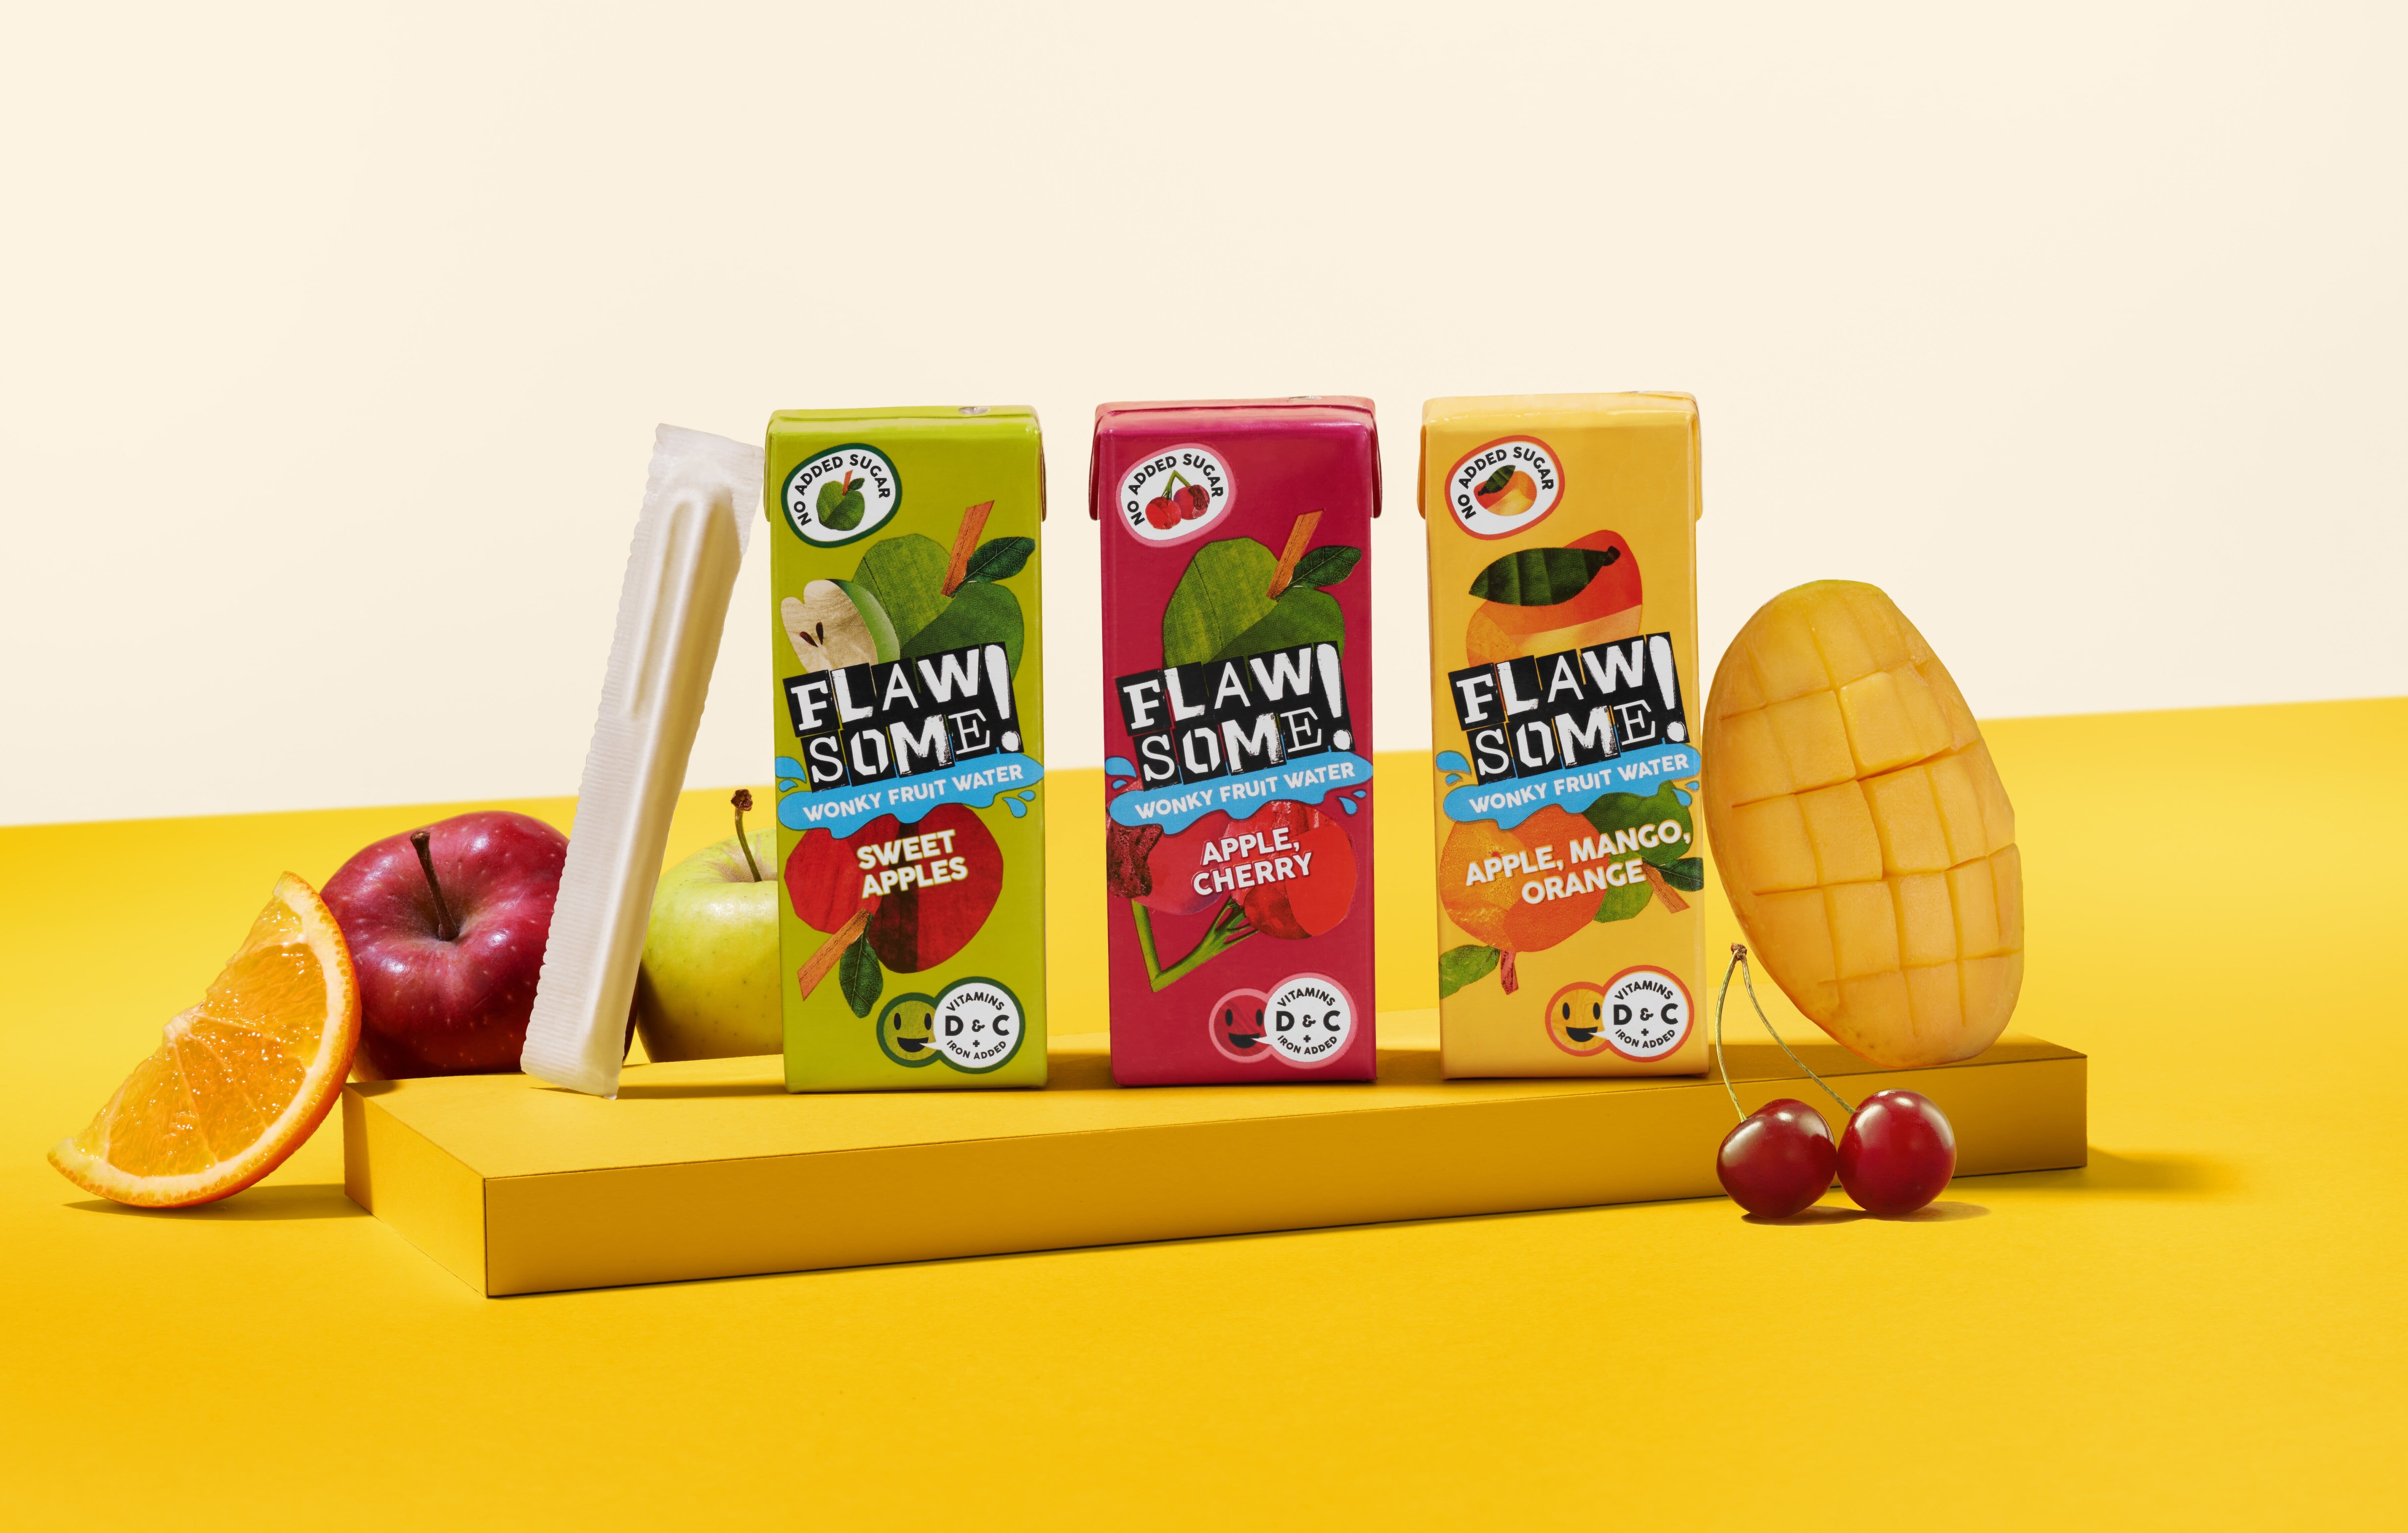 Wonky fruit drinks Flawsome! partners with Zizzi in £100,000 deal